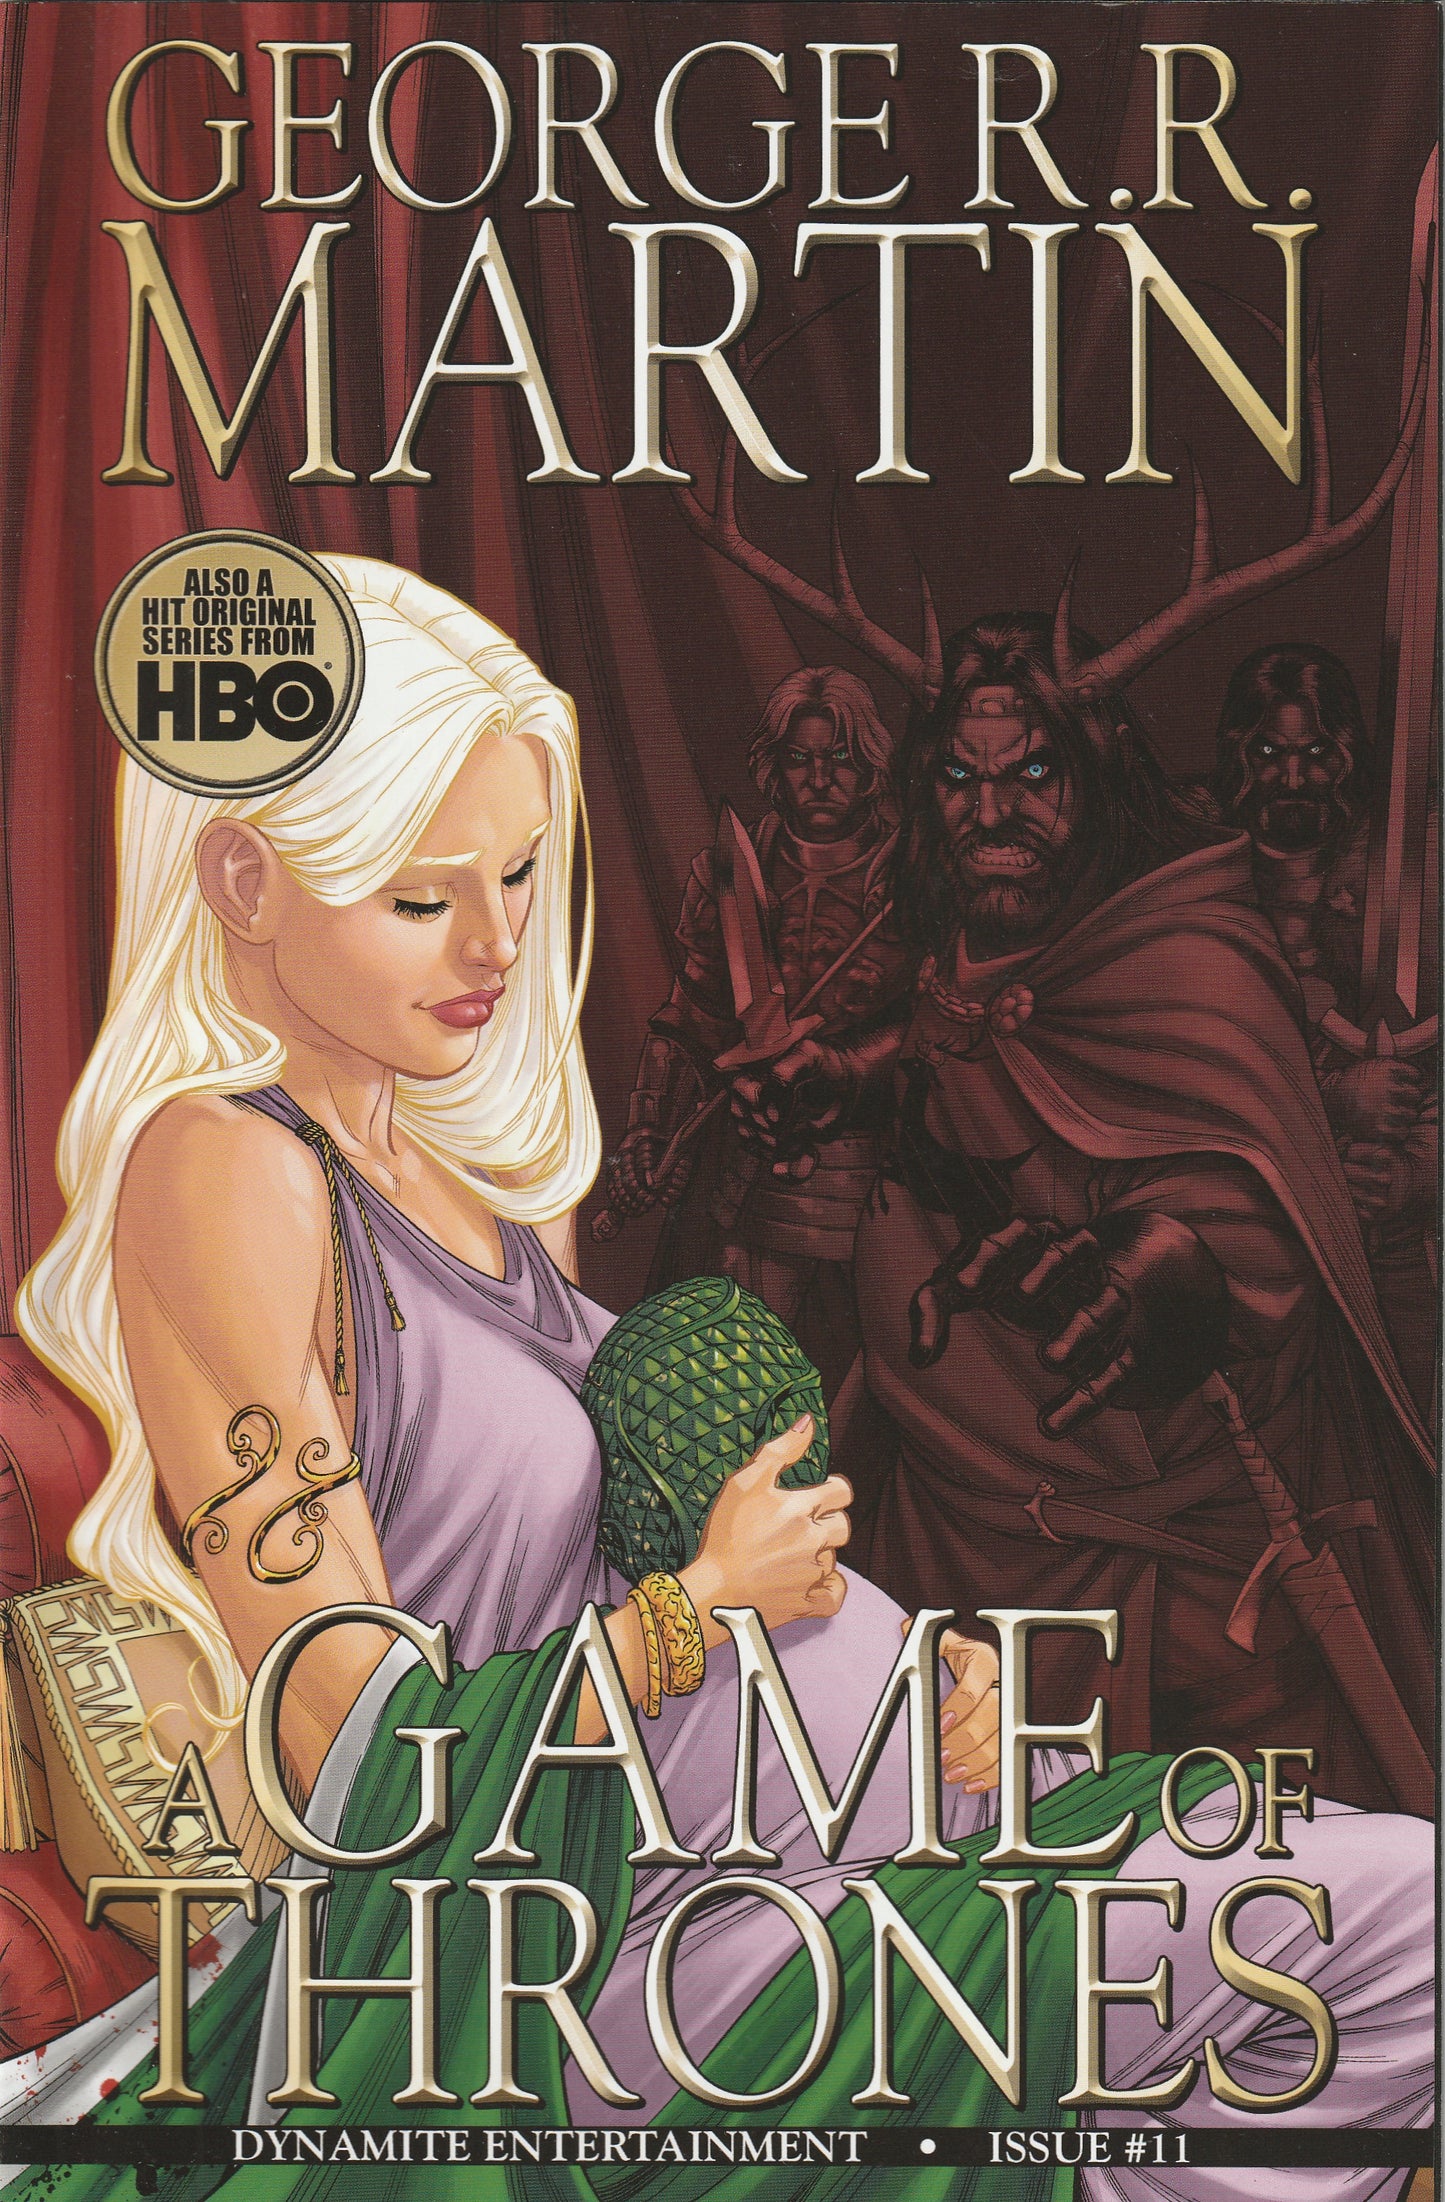 A Game of Thrones #11 (2012) - George R.R. Martin